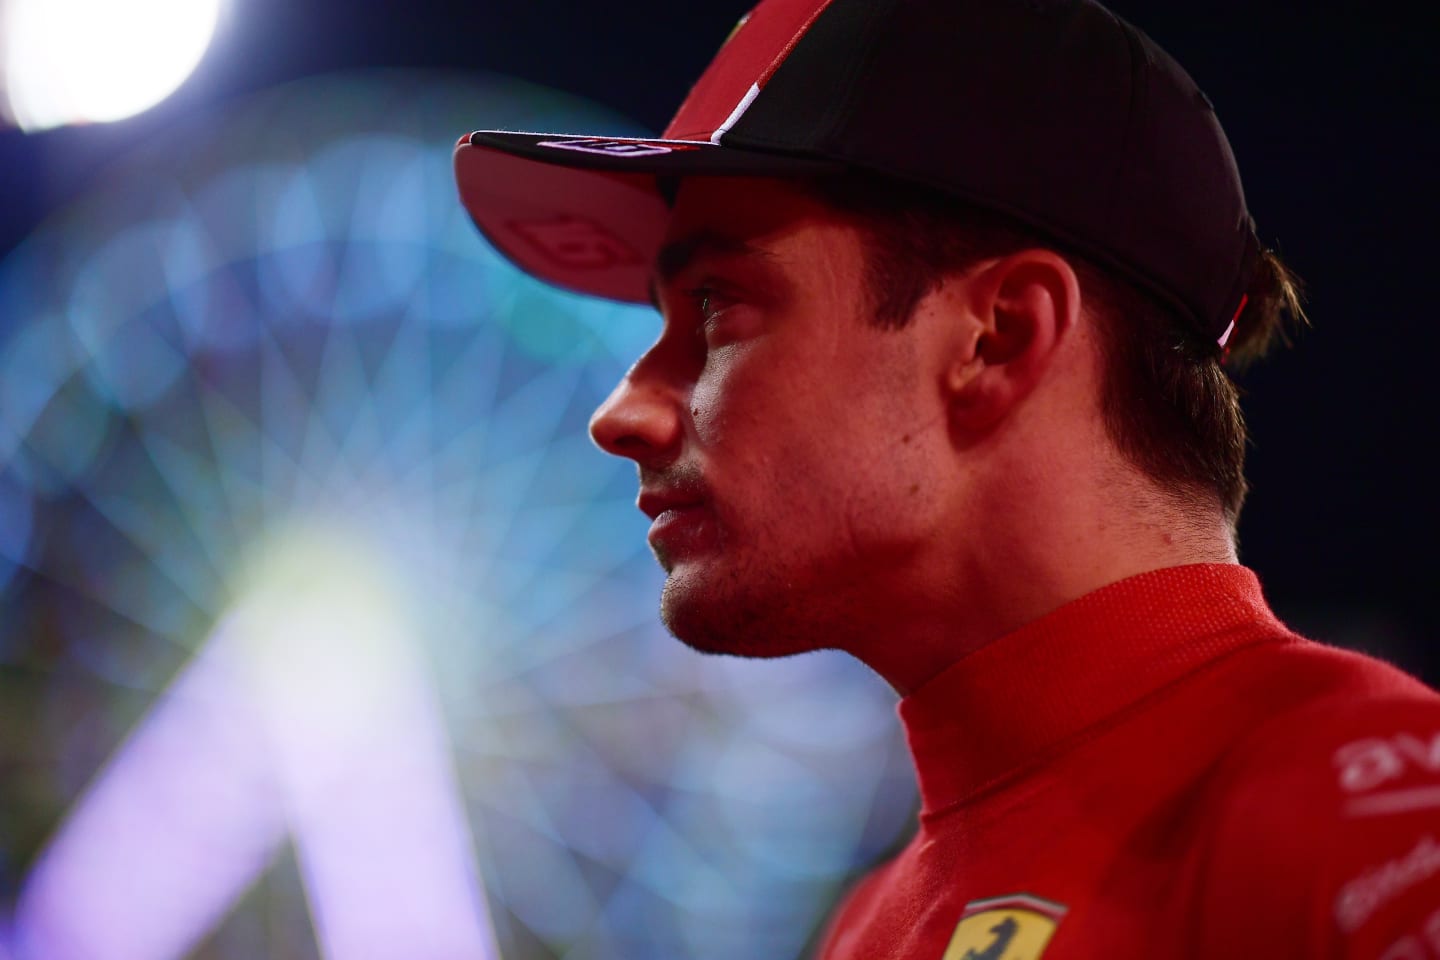 BAHRAIN, BAHRAIN - MARCH 04: Third placed qualifier Charles Leclerc of Monaco and Ferrari looks on in parc ferme during qualifying ahead of the F1 Grand Prix of Bahrain at Bahrain International Circuit on March 04, 2023 in Bahrain, Bahrain. (Photo by Mario Renzi - Formula 1/Formula 1 via Getty Images)